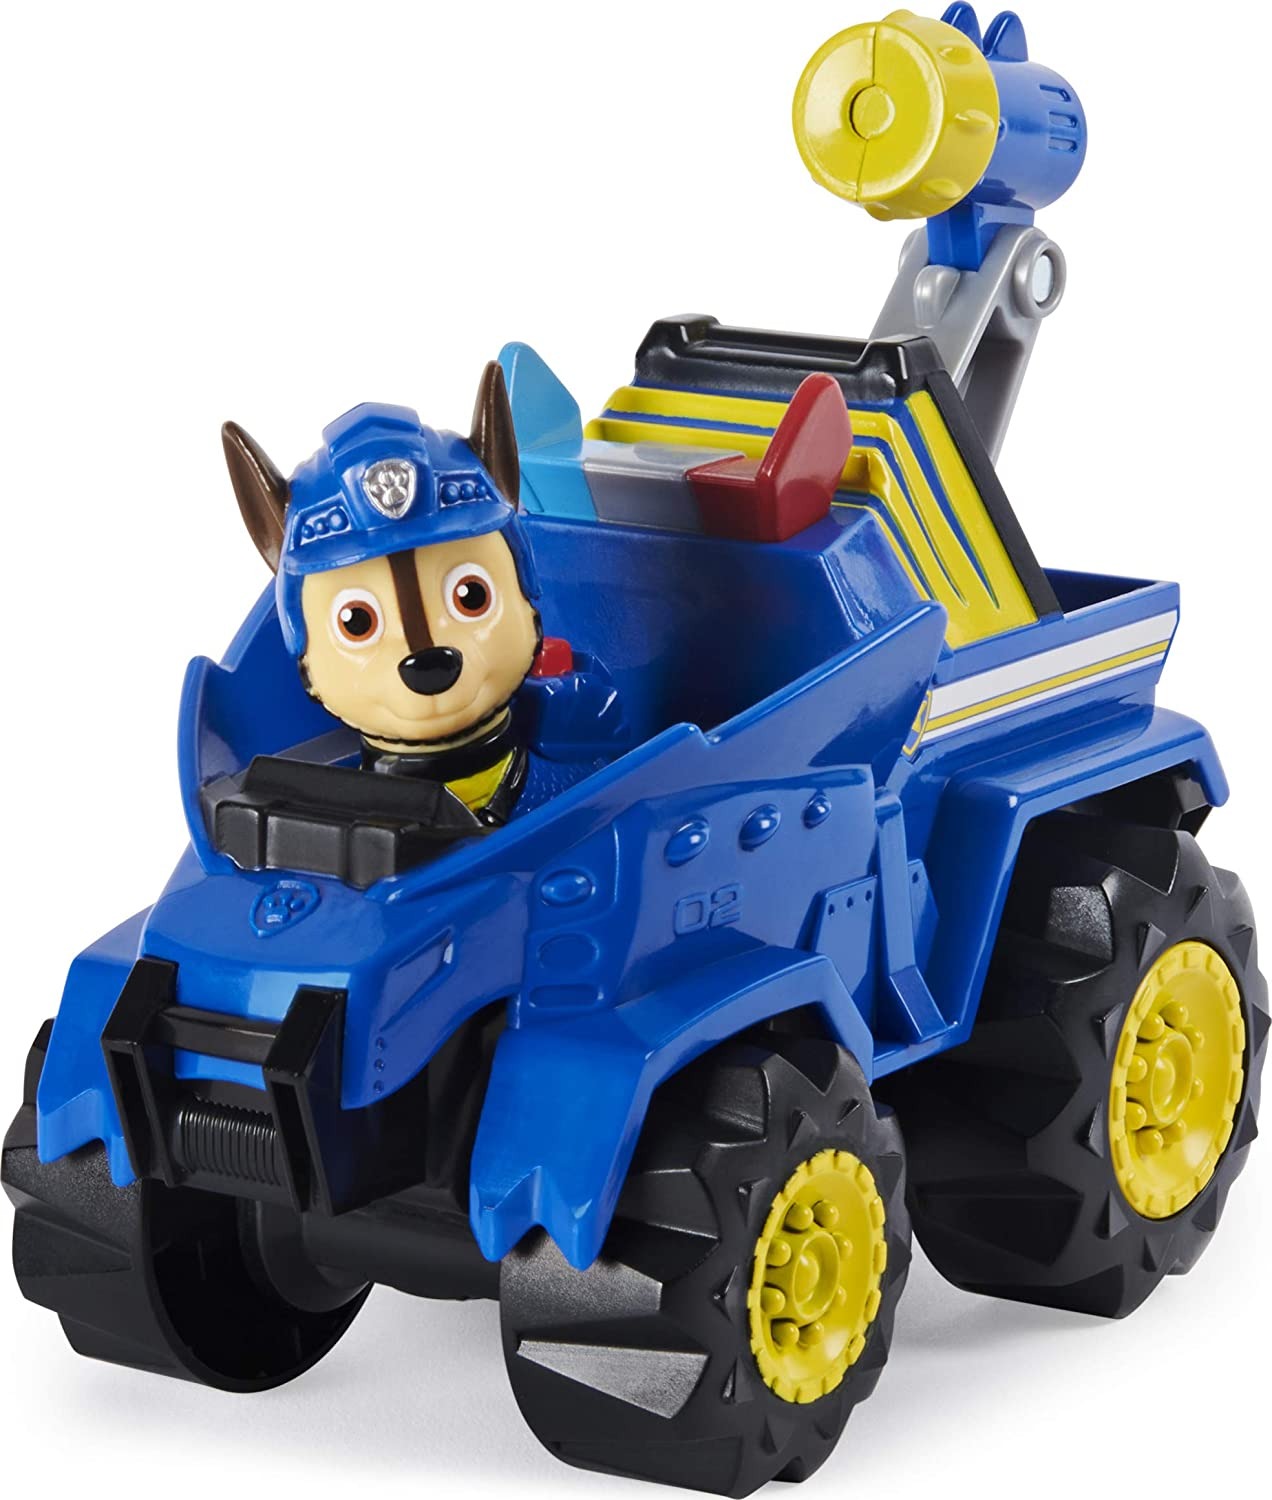 Paw Patrol Chase’s Deluxe Rev Up Vehicle or PJ Masks Save the Sky Cat-Car $6.50 each + 2.5% Slickdeals Cashback (PC Req'd) at Target + FS w/ RedCard or $35+